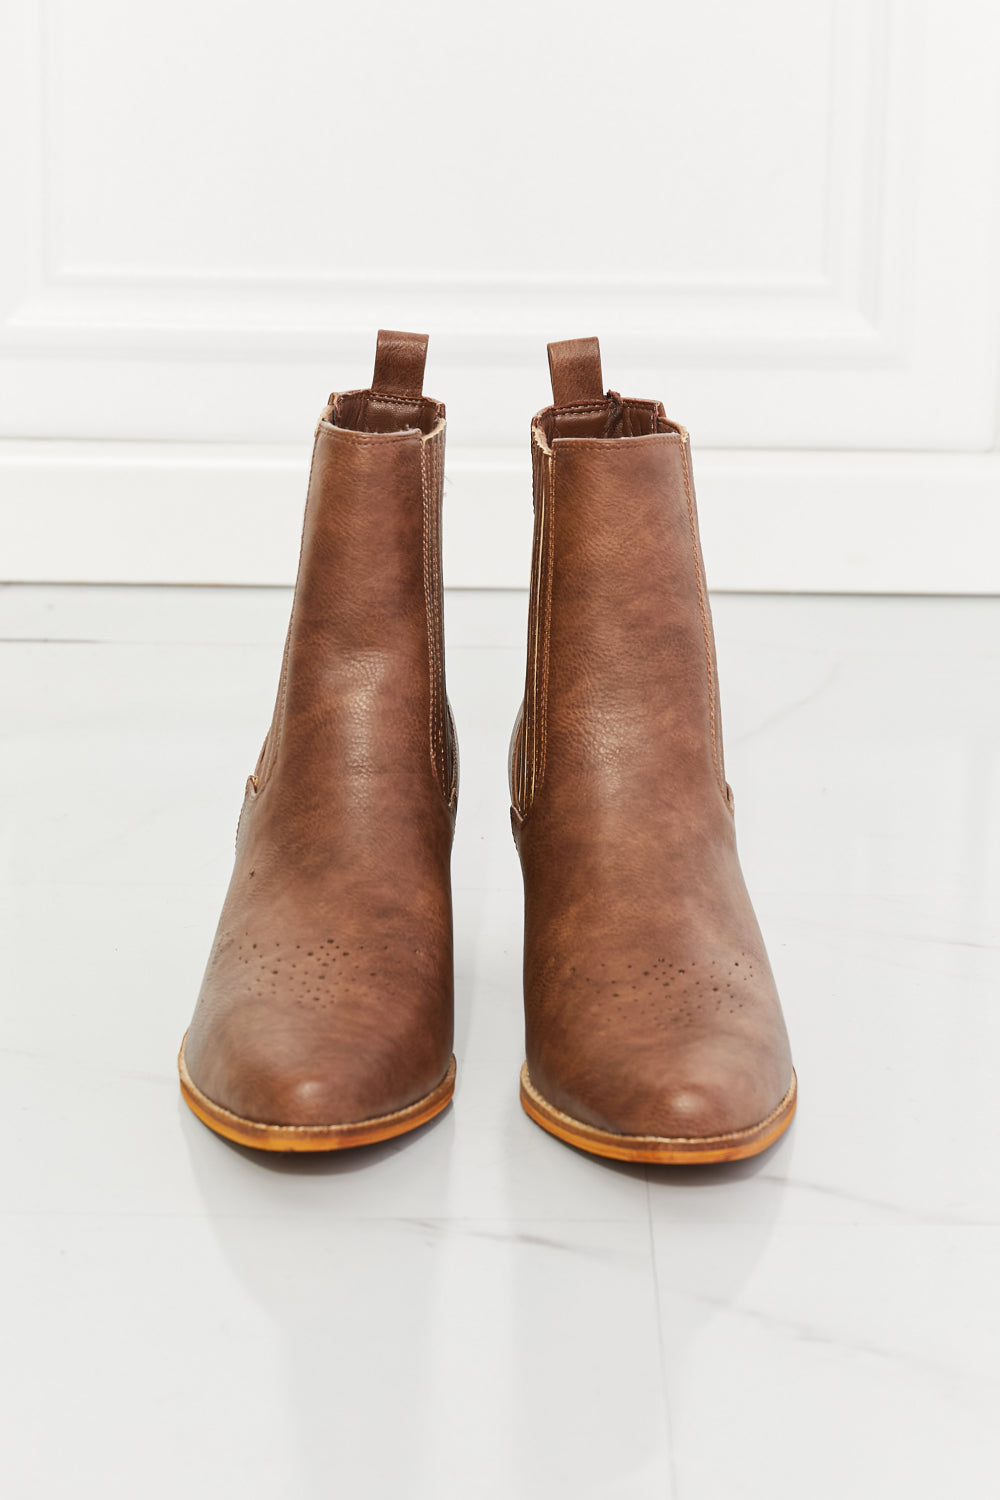 Sienna MMShoes Love the Journey Stacked Heel Chelsea Boot in Chestnut Sentient Beauty Fashions shoes